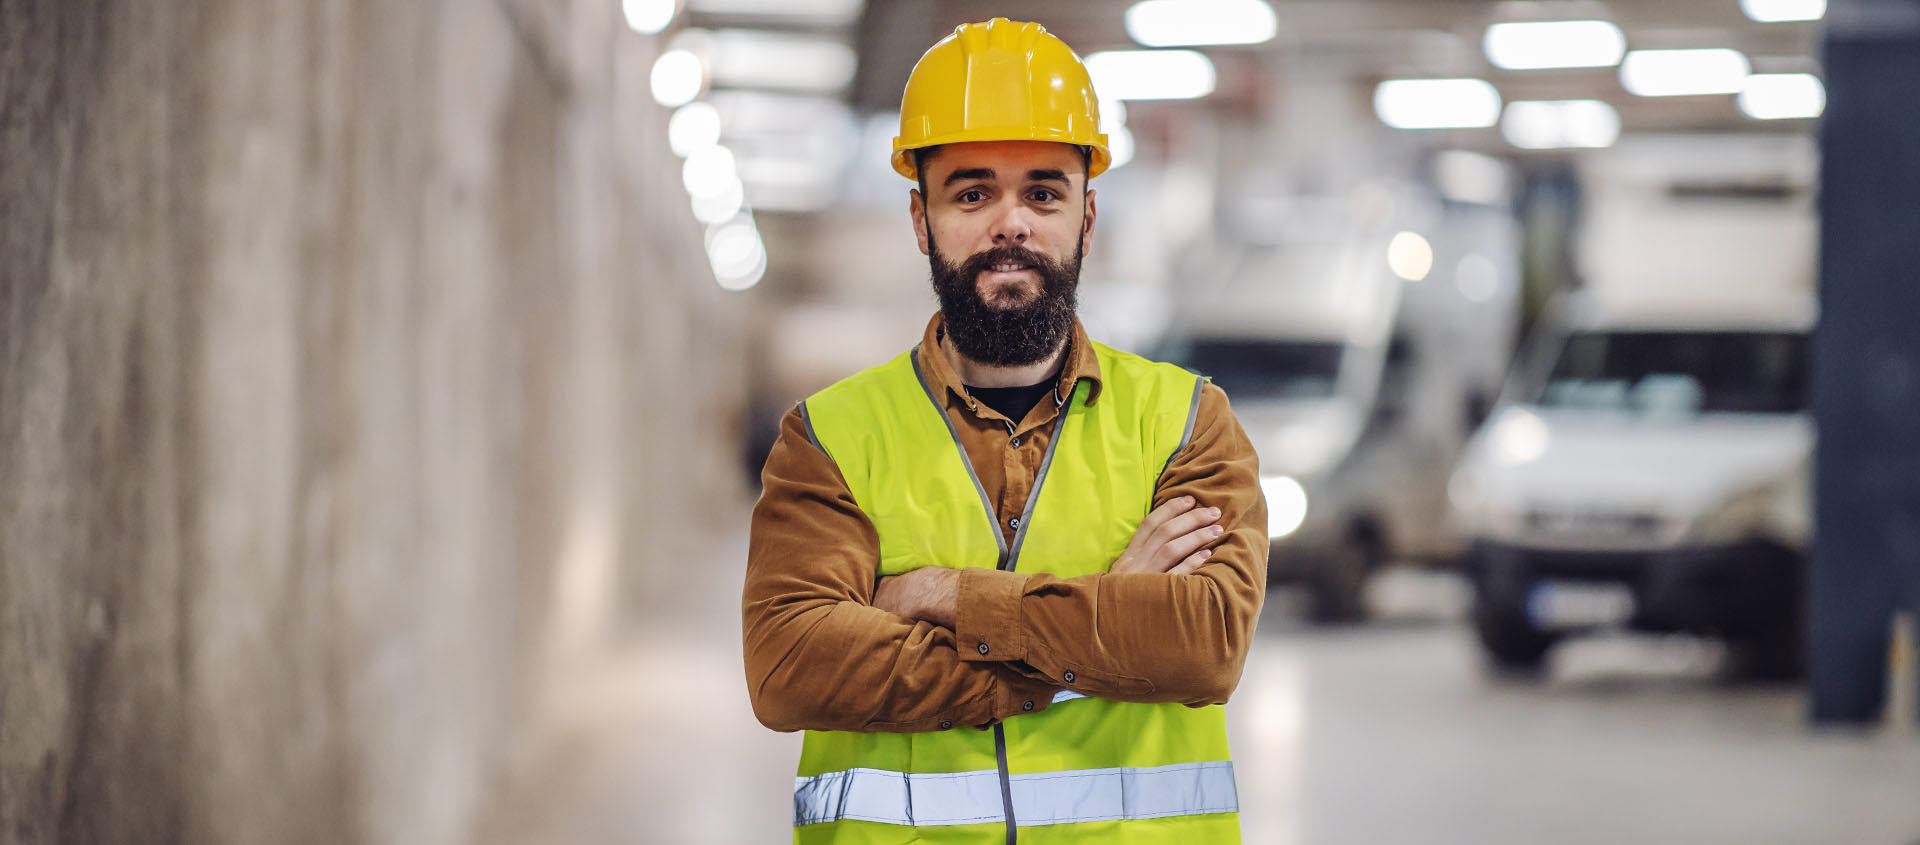 Bearded man in yellow hard hat and vest, crossing arms and smiling